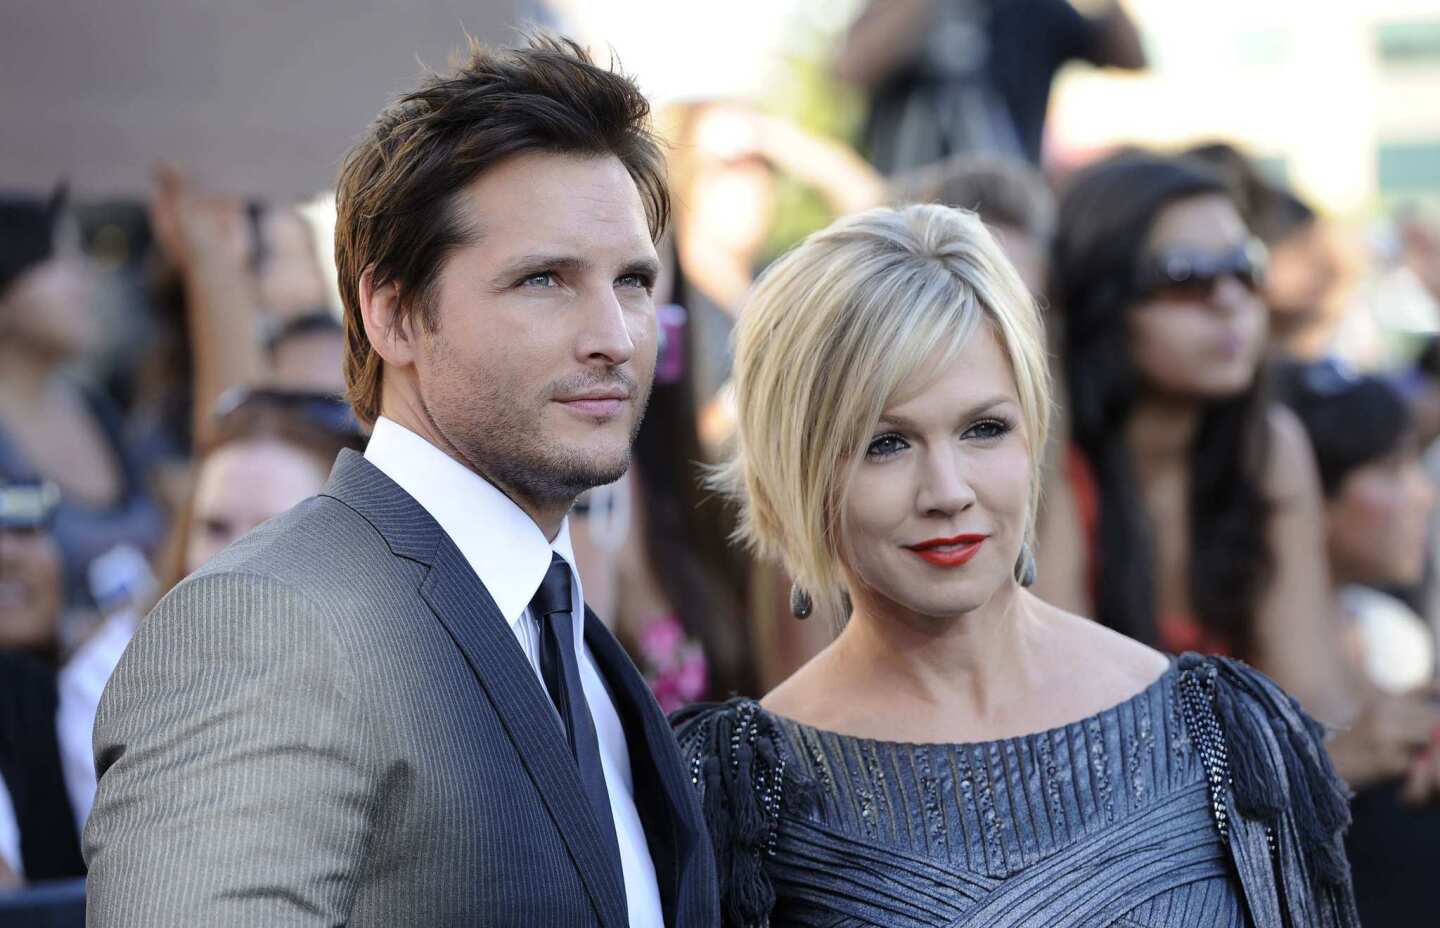 Jennie Garth and Peter Facinelli are calling it quits after 11 years of marriage. The "90210" meets "Twilight" couple filed for divorce, but remain amicable and dedicated to raising their three daughters together. Rumors surfaced shortly after the announcement that Facinelli was cheating, but the couple says it simply isn't true. "There are rumors out there which are completely untrue and hurtful to our family," they said in a joint statement Wednesday. "We just want to make it very clear -- there are no third parties involved."